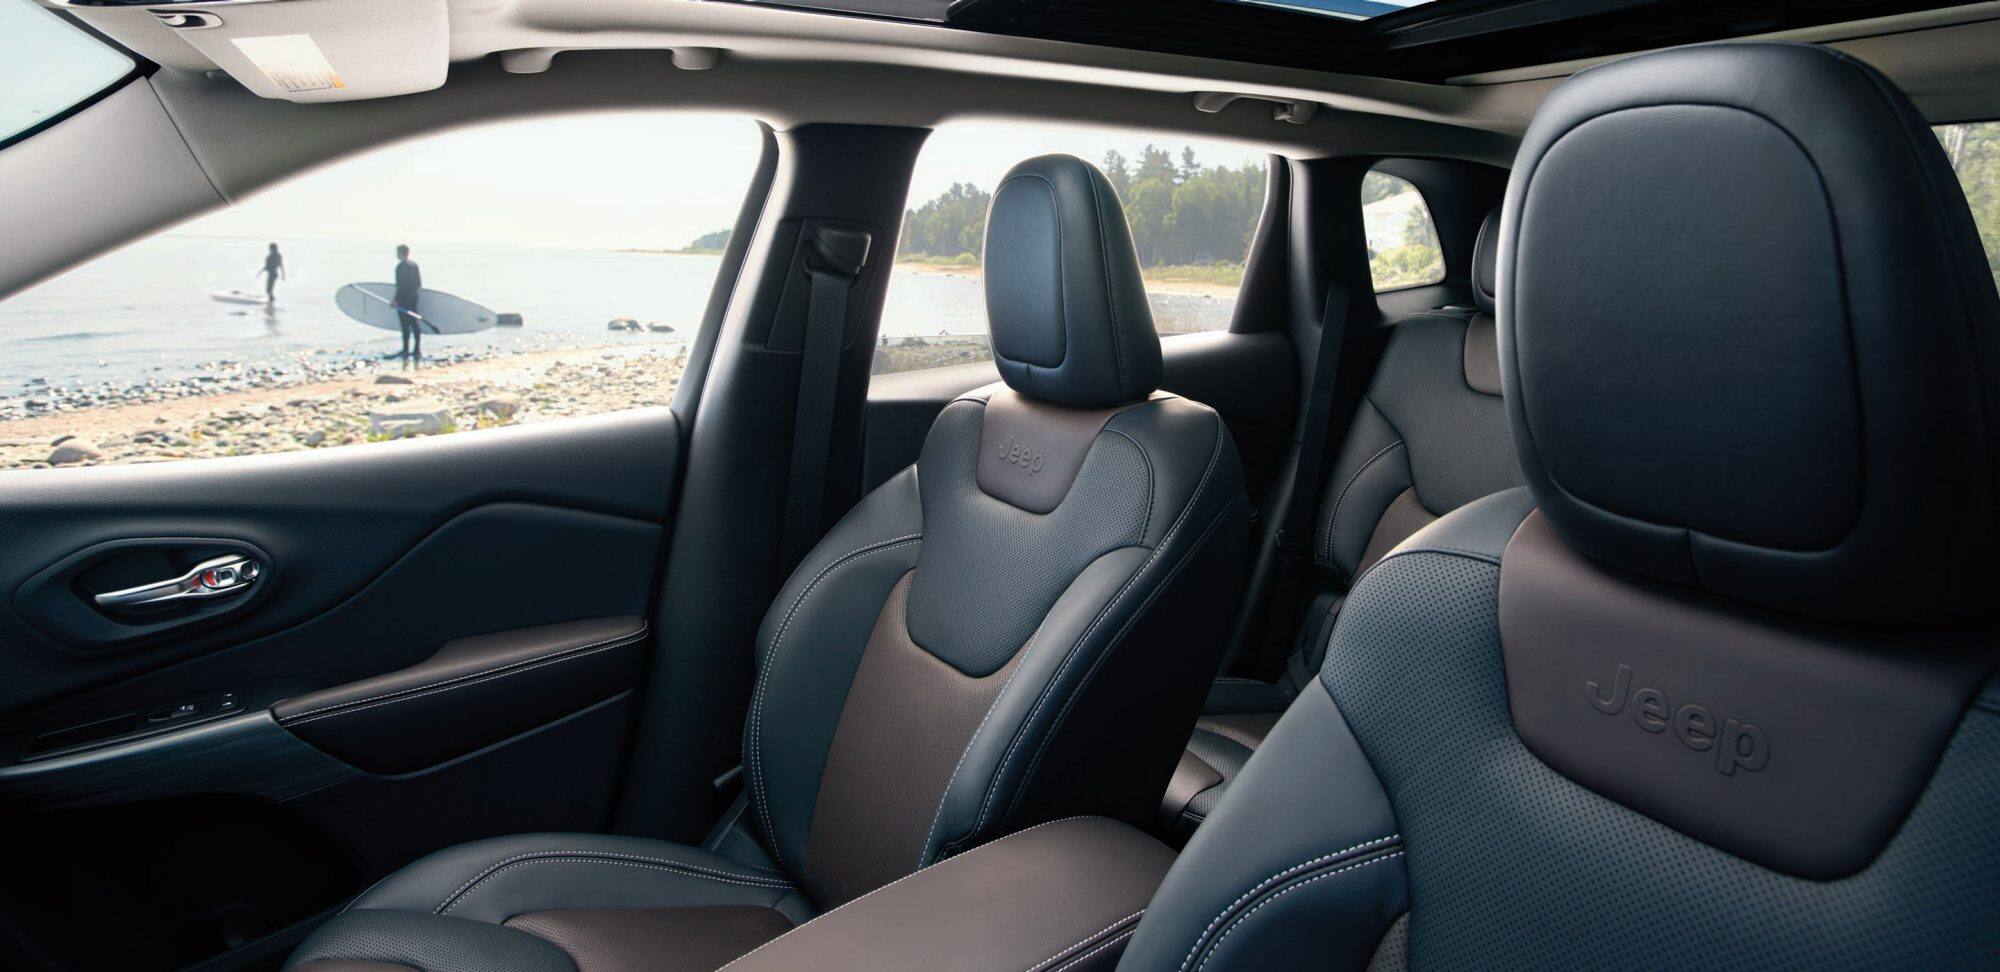 Black 2018 Jeep Cherokee seats with surfers in background through window